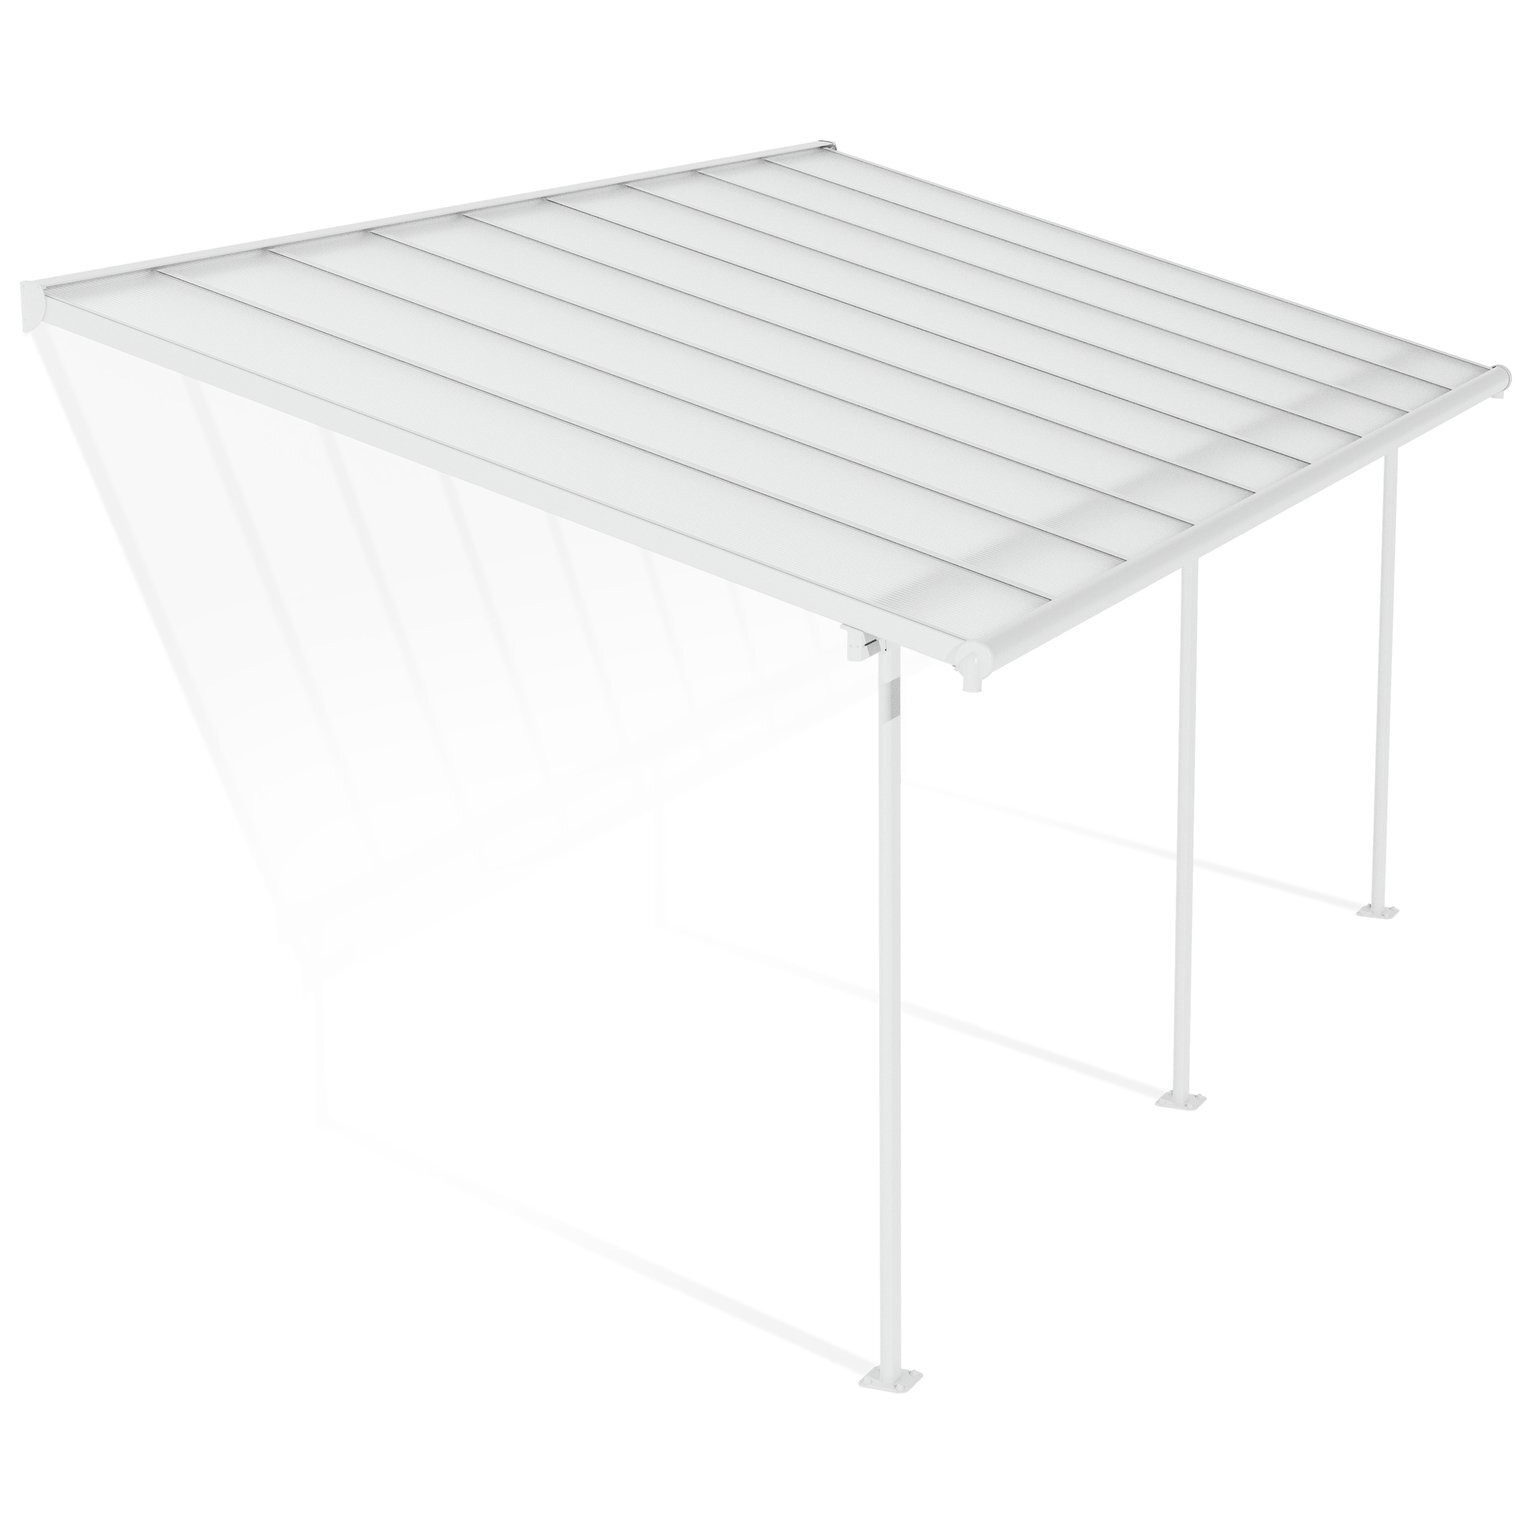 Palram - Canopia Sierra 3 x 5.46m  Patio Cover - White Clear - image 1